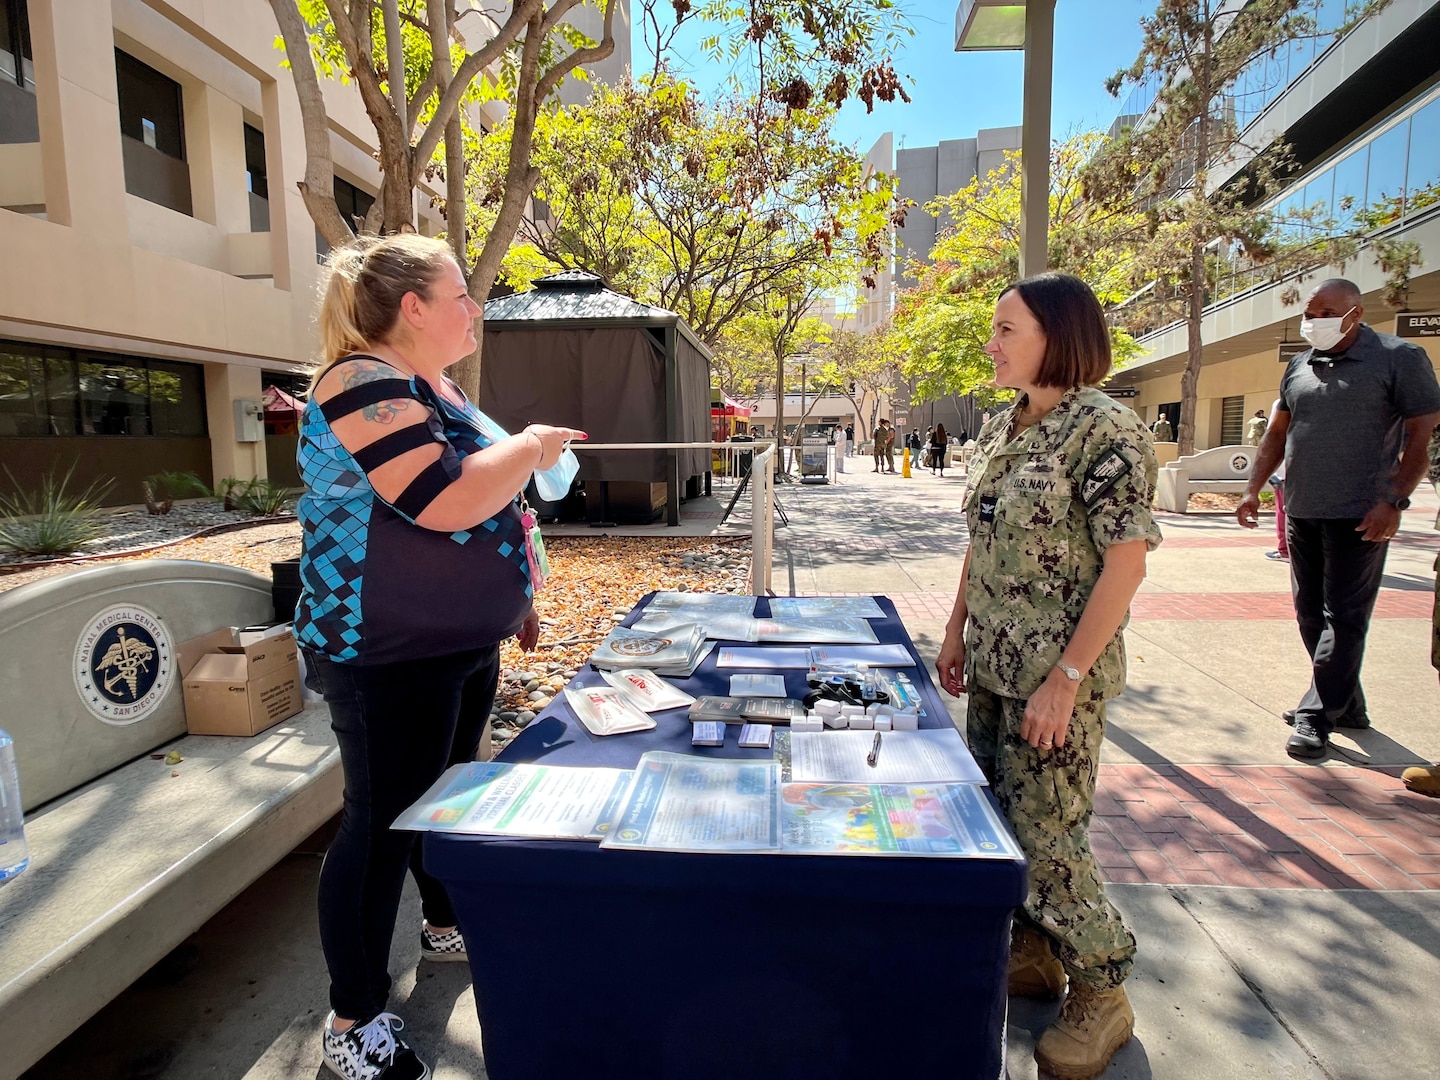 Naval Medical Center San Diego (NMCSD) kicked off the Health and Wellness department’s Week of Wellness fair, Oct. 17, 2022.  The week-long event covers a broad range of topics all aimed at improving one’s overall health and wellness.  Jacqueline Arvizu, NMCSD Health and Wellness Department division officer speaks with Capt. Kim Davis, NMCSD director about the department's Week of Wellness activities.  NMCSD's mission is to prepare service members to deploy in support of operational forces, deliver high quality healthcare services and shape the future of military medicine through education, training and research. NMCSD employs more than 6,000 active duty military personnel, civilians and contractors in Southern California to provide patients with world-class care anytime, anywhere.